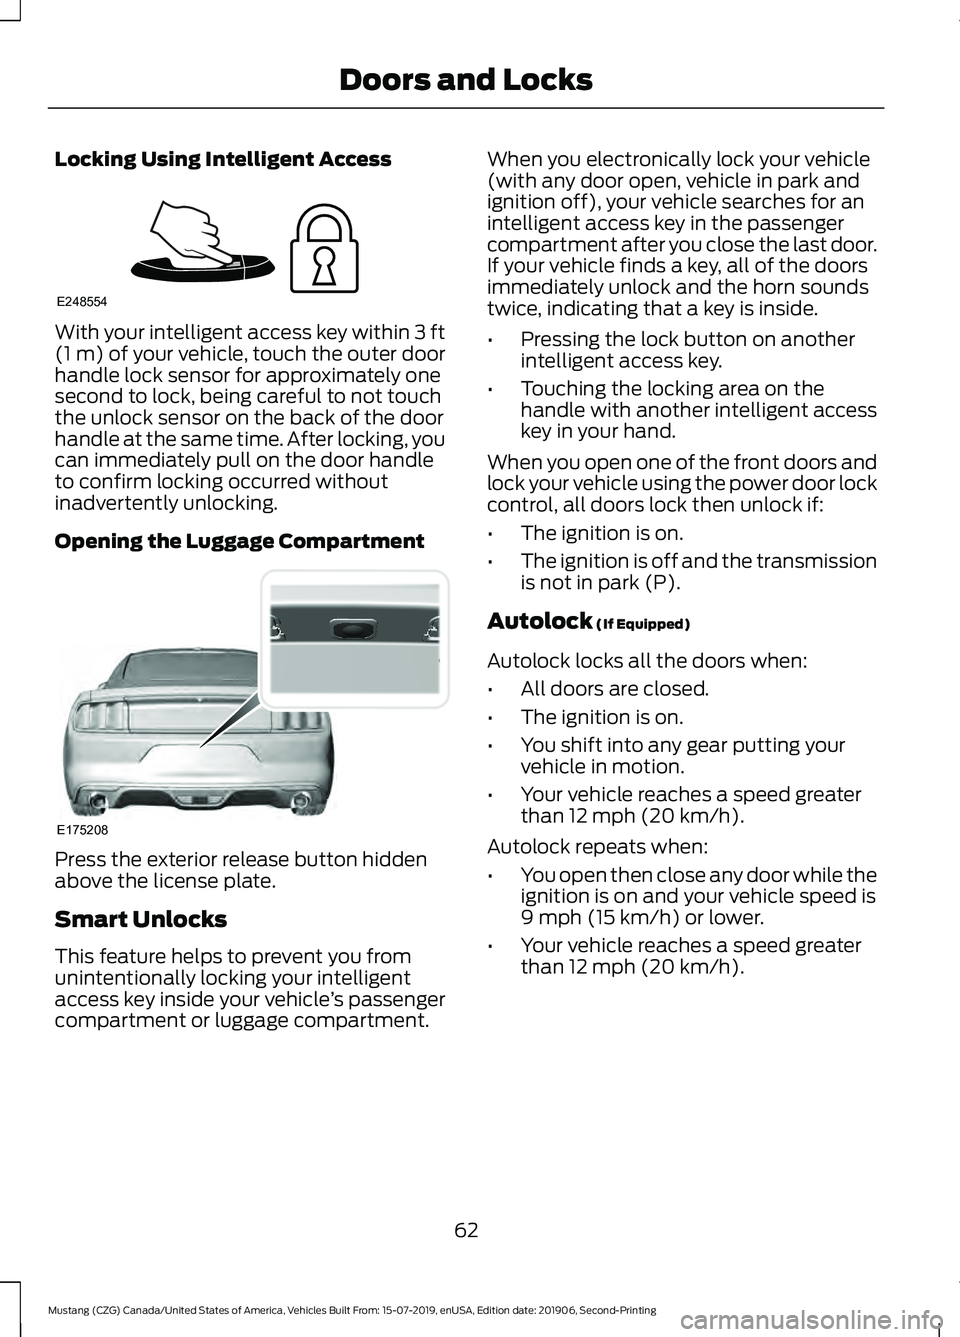 FORD MUSTANG 2020  Owners Manual Locking Using Intelligent Access
With your intelligent access key within 3 ft
(1 m) of your vehicle, touch the outer door
handle lock sensor for approximately one
second to lock, being careful to not 